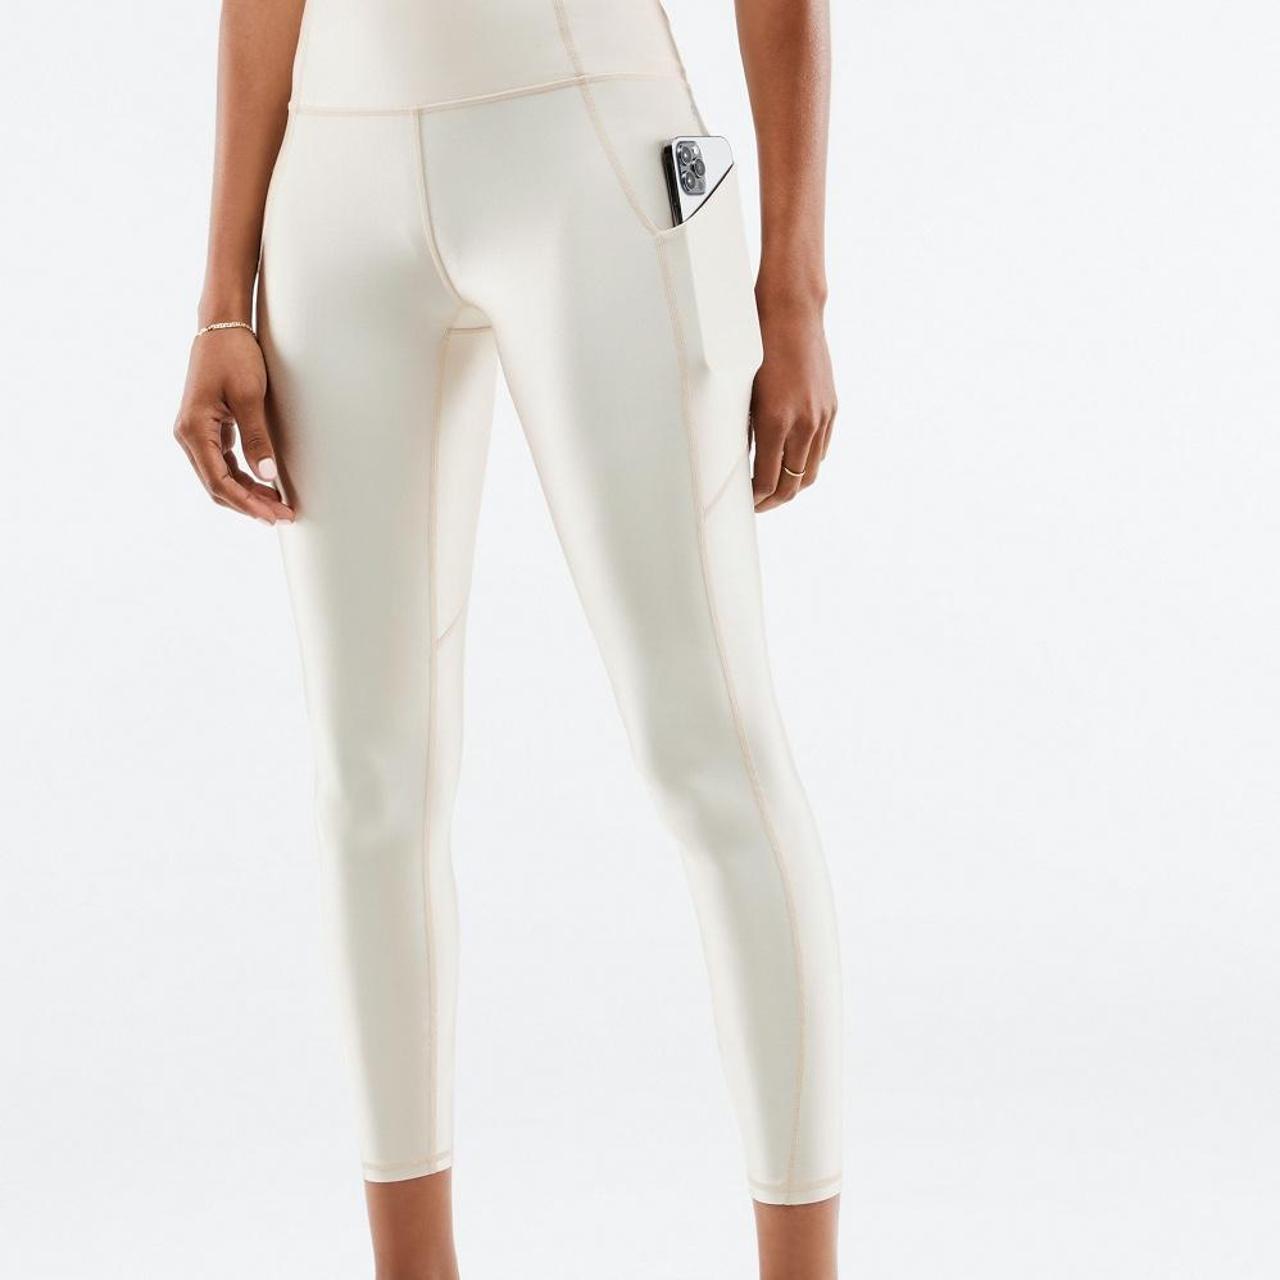 High-Waisted PureLuxe Pocket 7/8